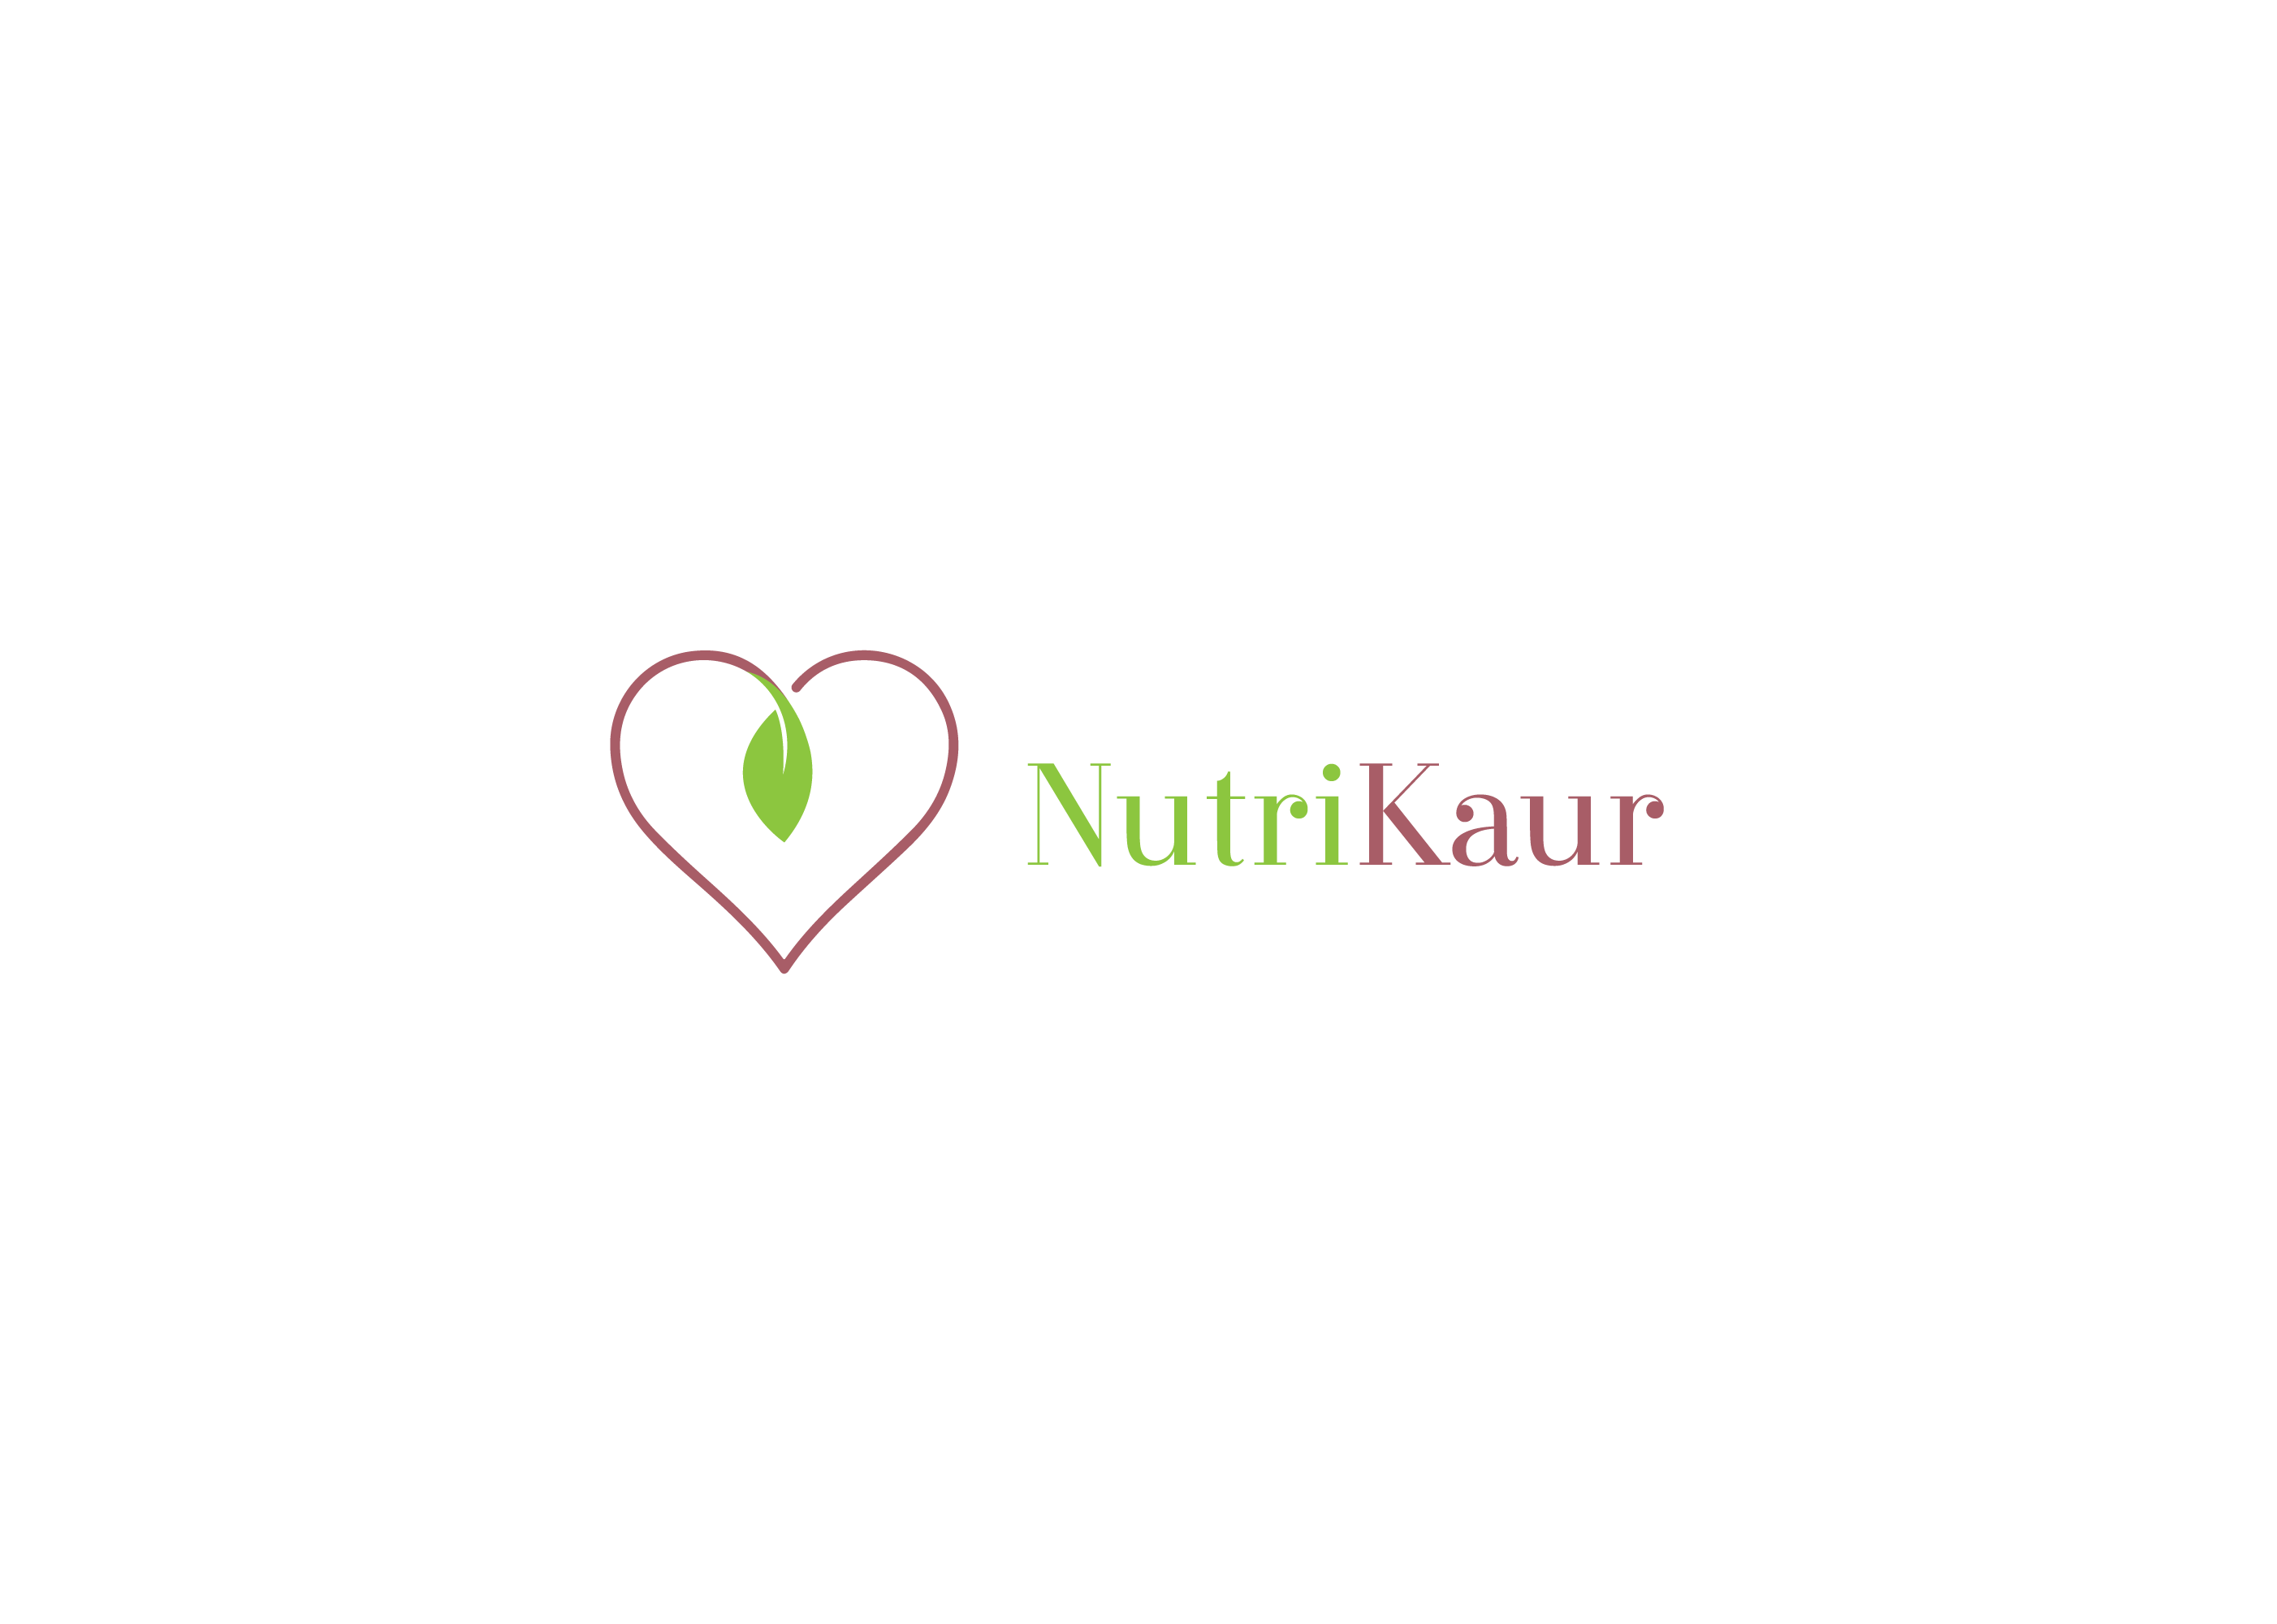 Plant-Based Diet With Confidence - NutriKaur